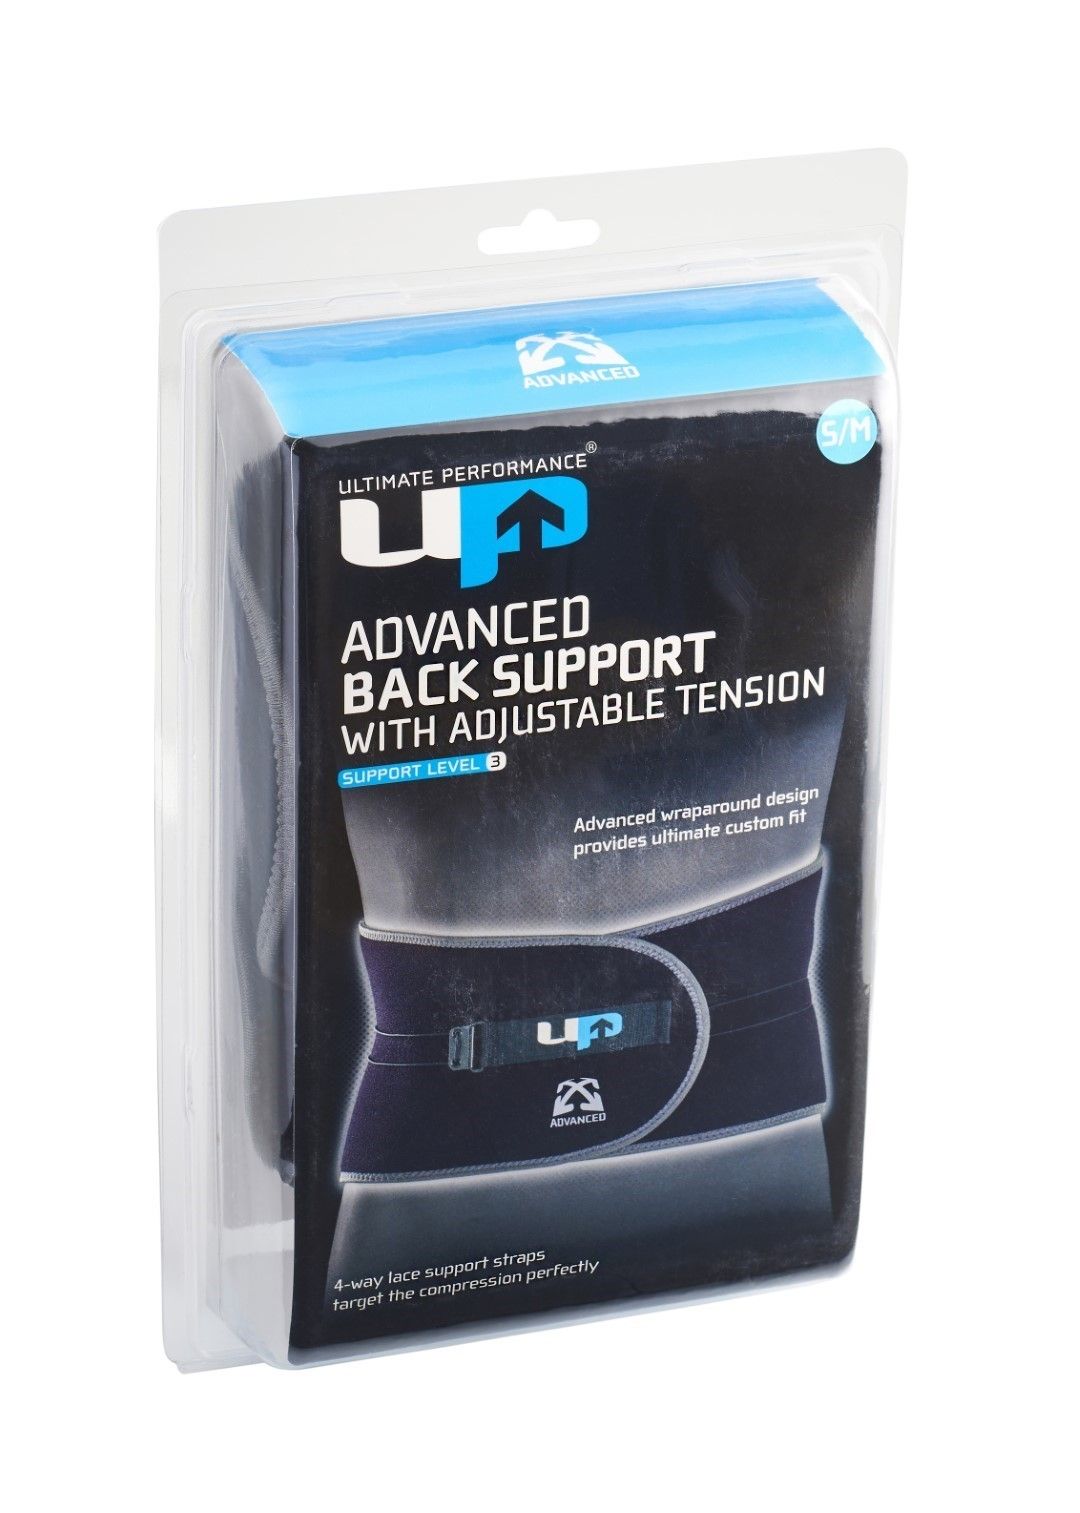 ULTIMATE PERFORMANCE ADVANCED BACK SUPPORT WITH ADJUSTABLE TENSION photo